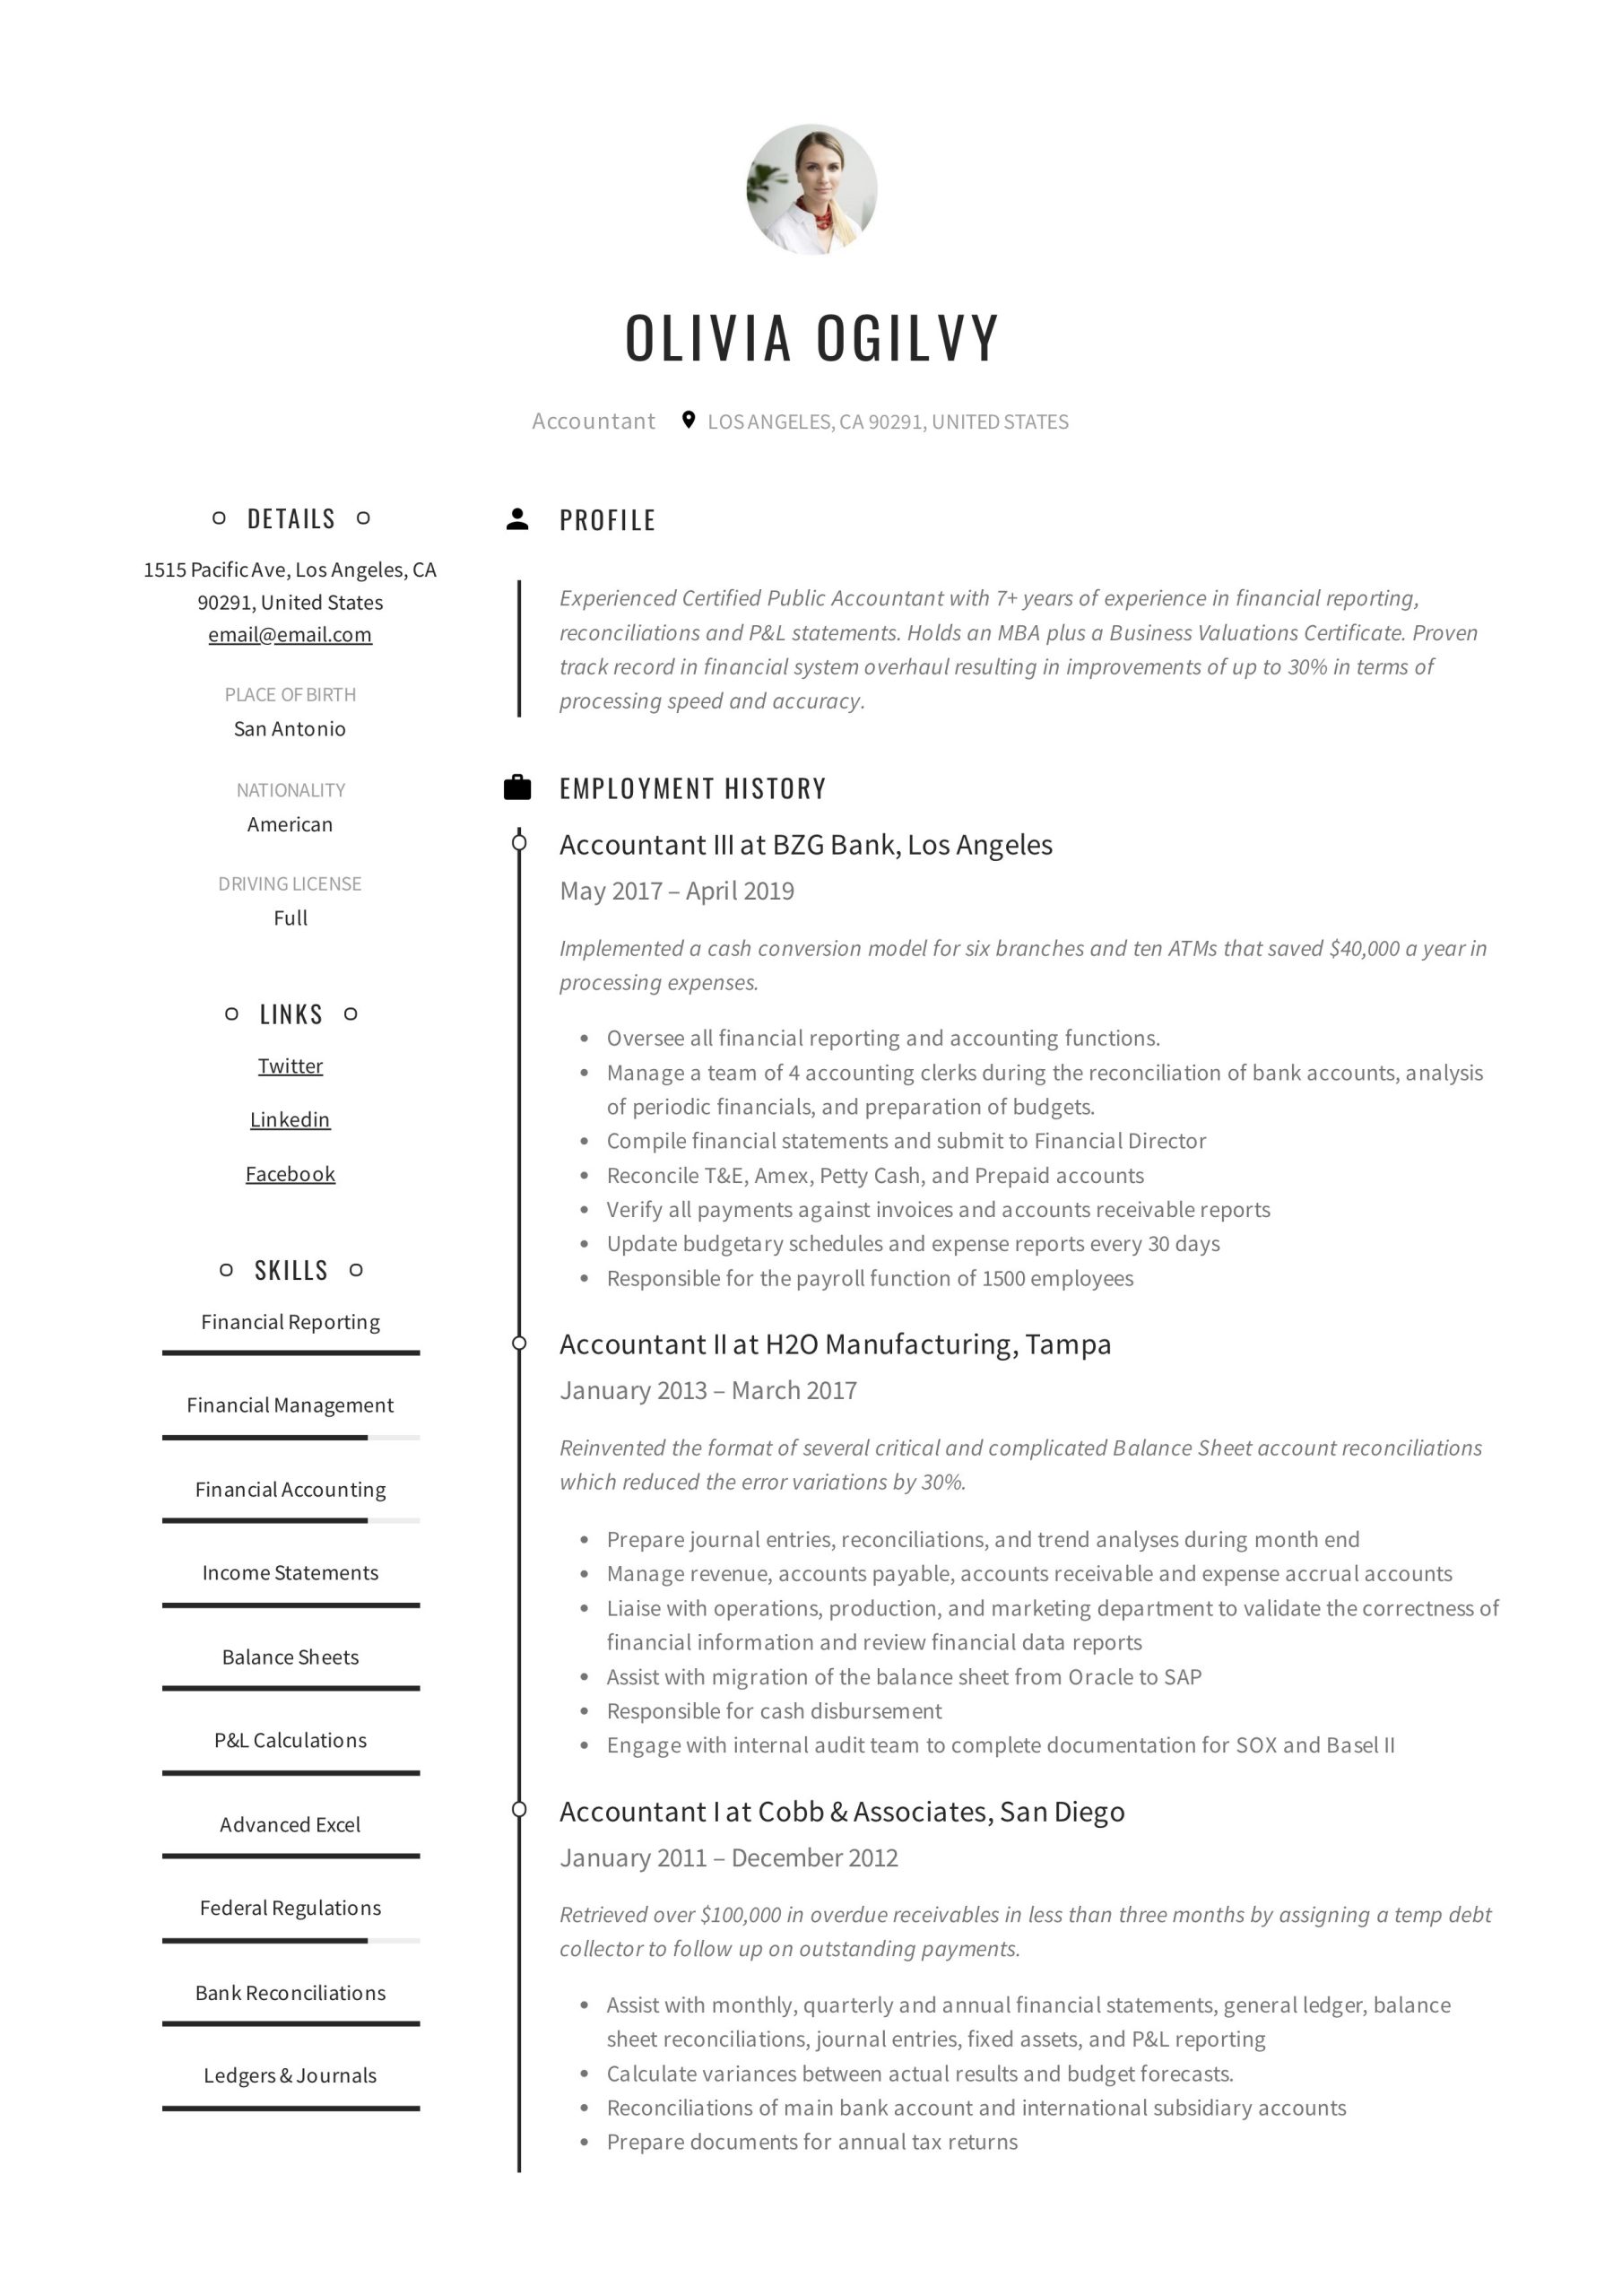 Sample Of Good Resume for Intermediate General Accountant Accountant Resume & Writing Guide 19 Templates 2022